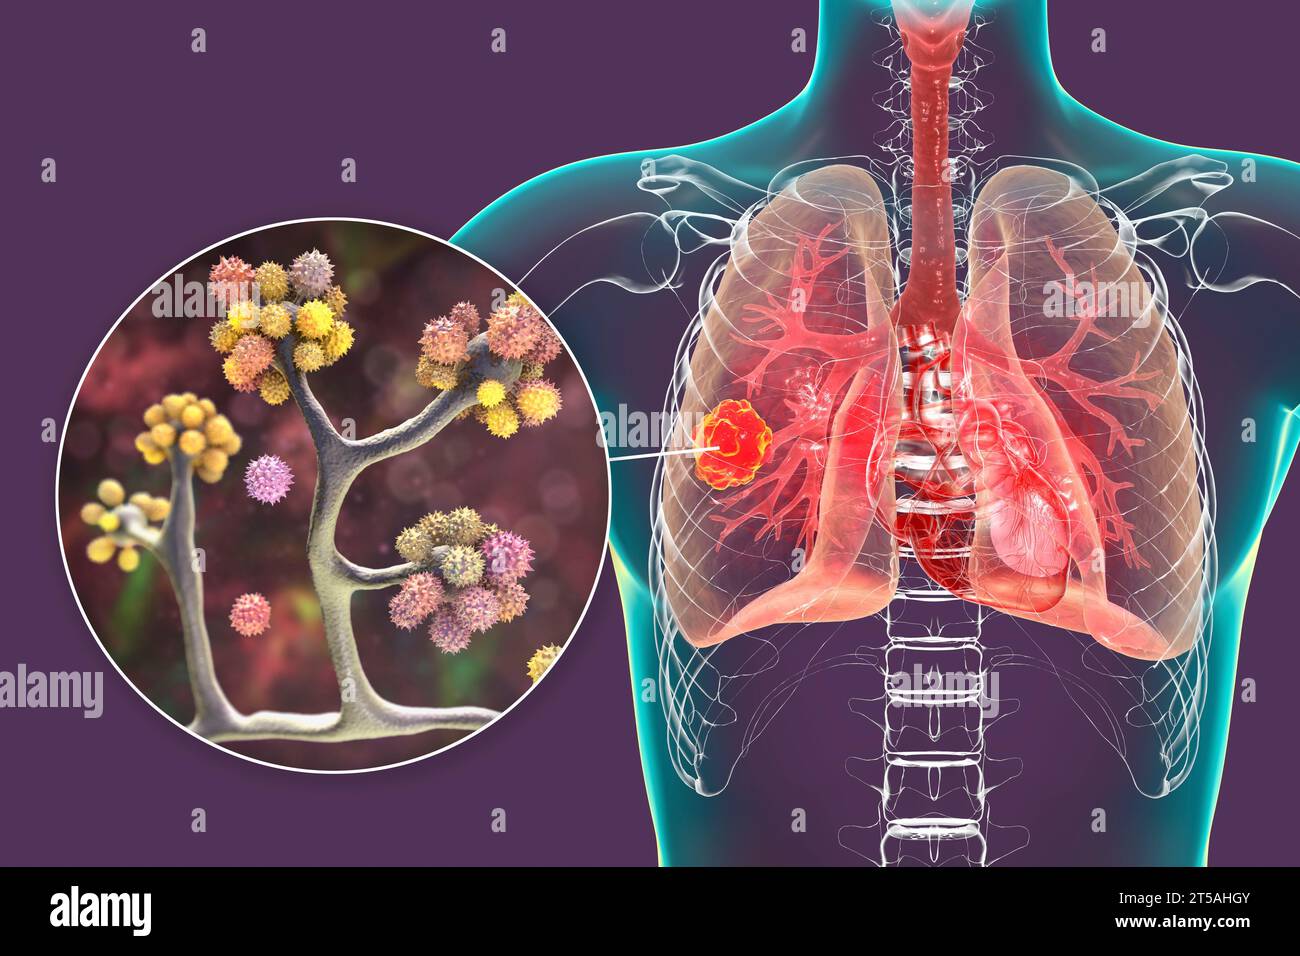 Lung mucormycosis lesion, illustration Stock Photo